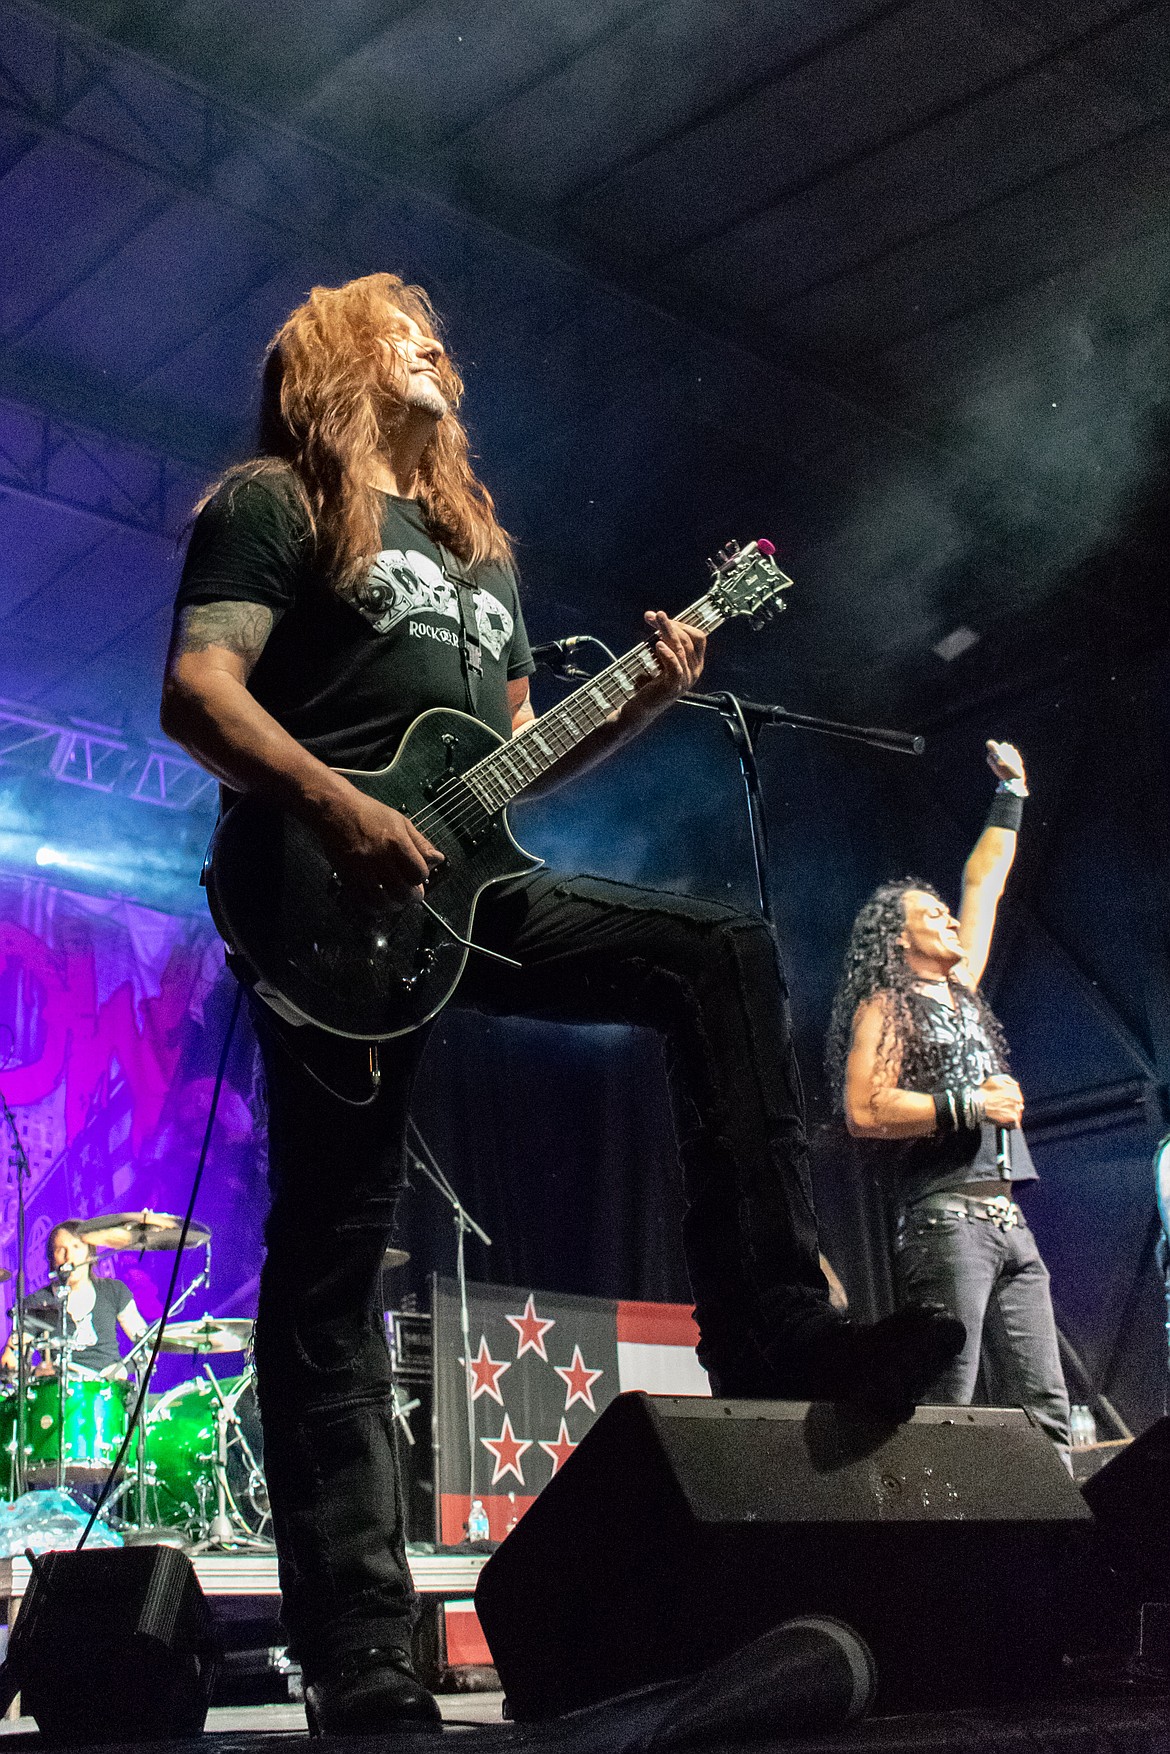 With guitarist David &#147;The Snake&#148; Sabo in the foreground, Skid Row frontman ZP Theart salutes and thanks the audience near the end of their show during the Big Sky Bash to benefit the Card Foundation on Saturday. (Ben Kibbey/The Western News)